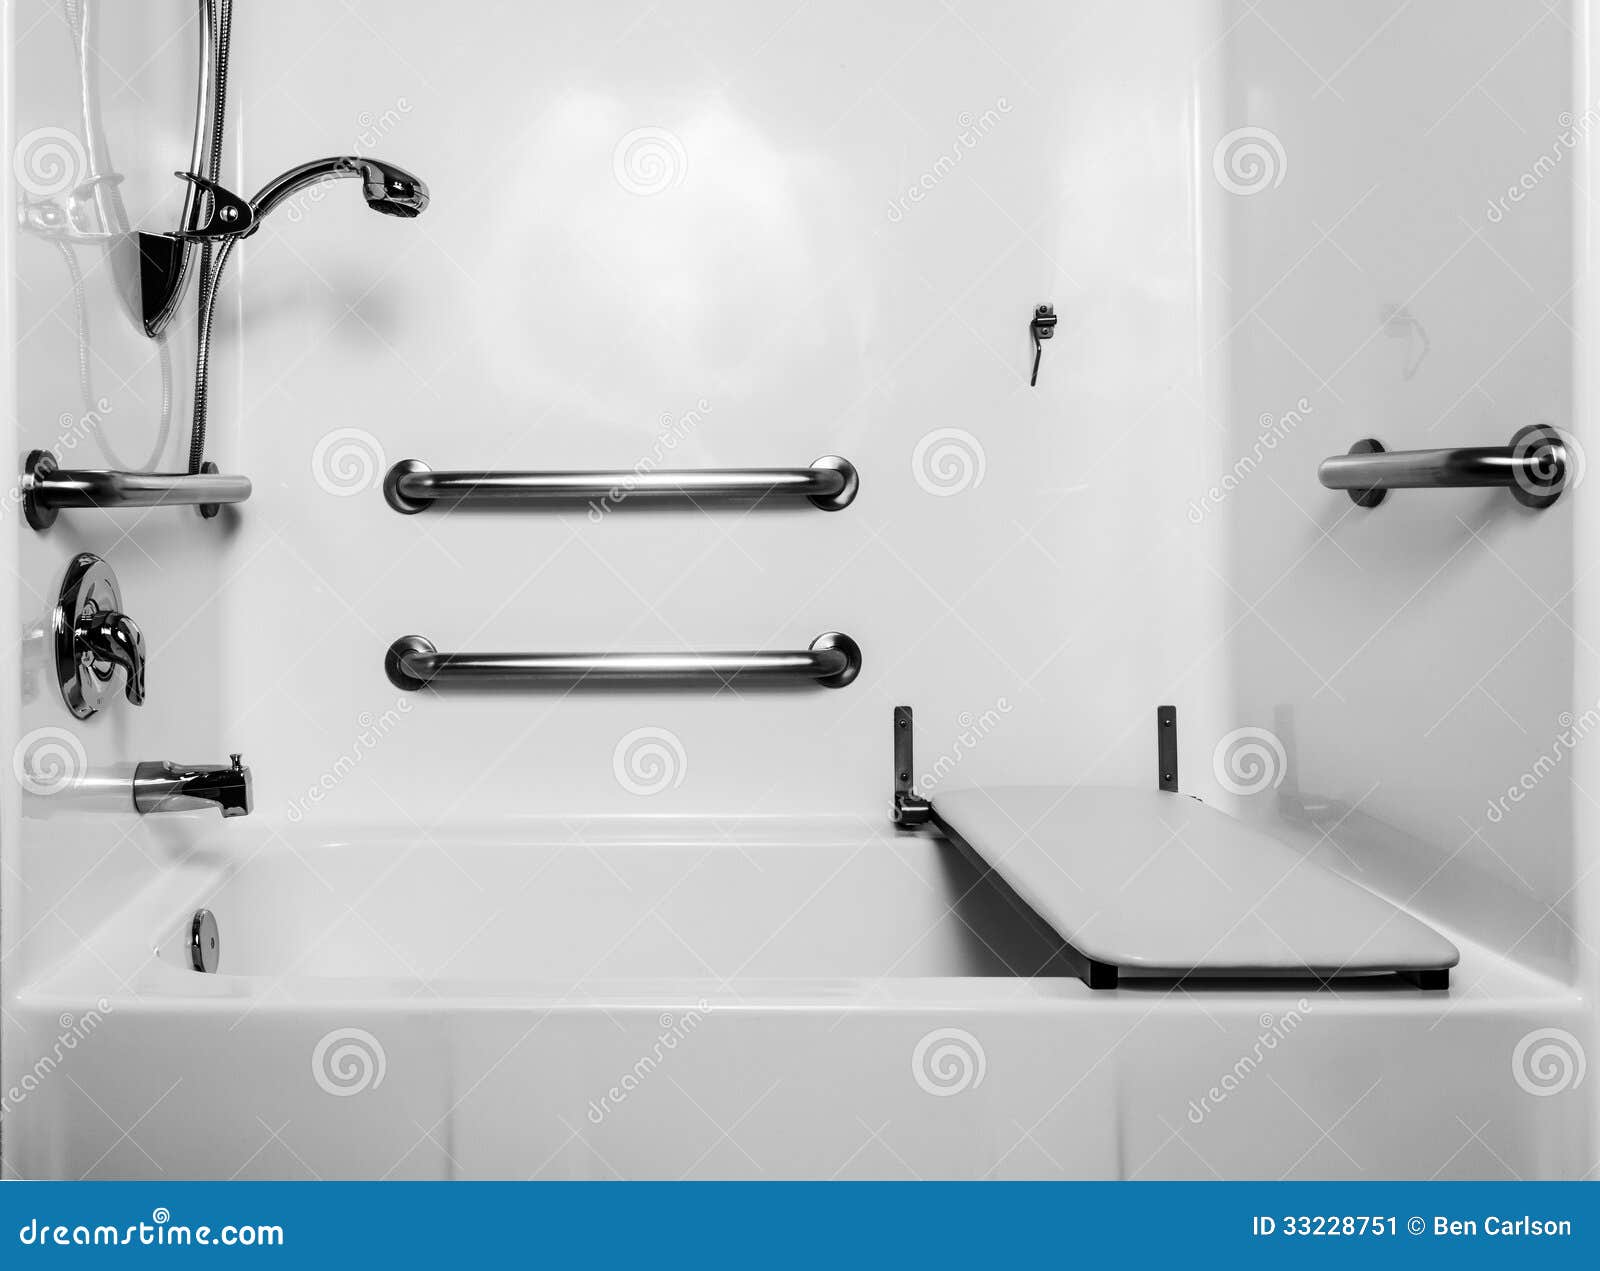 https://thumbs.dreamstime.com/z/handicap-bath-fold-down-seat-helps-disabled-use-shower-easier-access-height-wheelchair-33228751.jpg